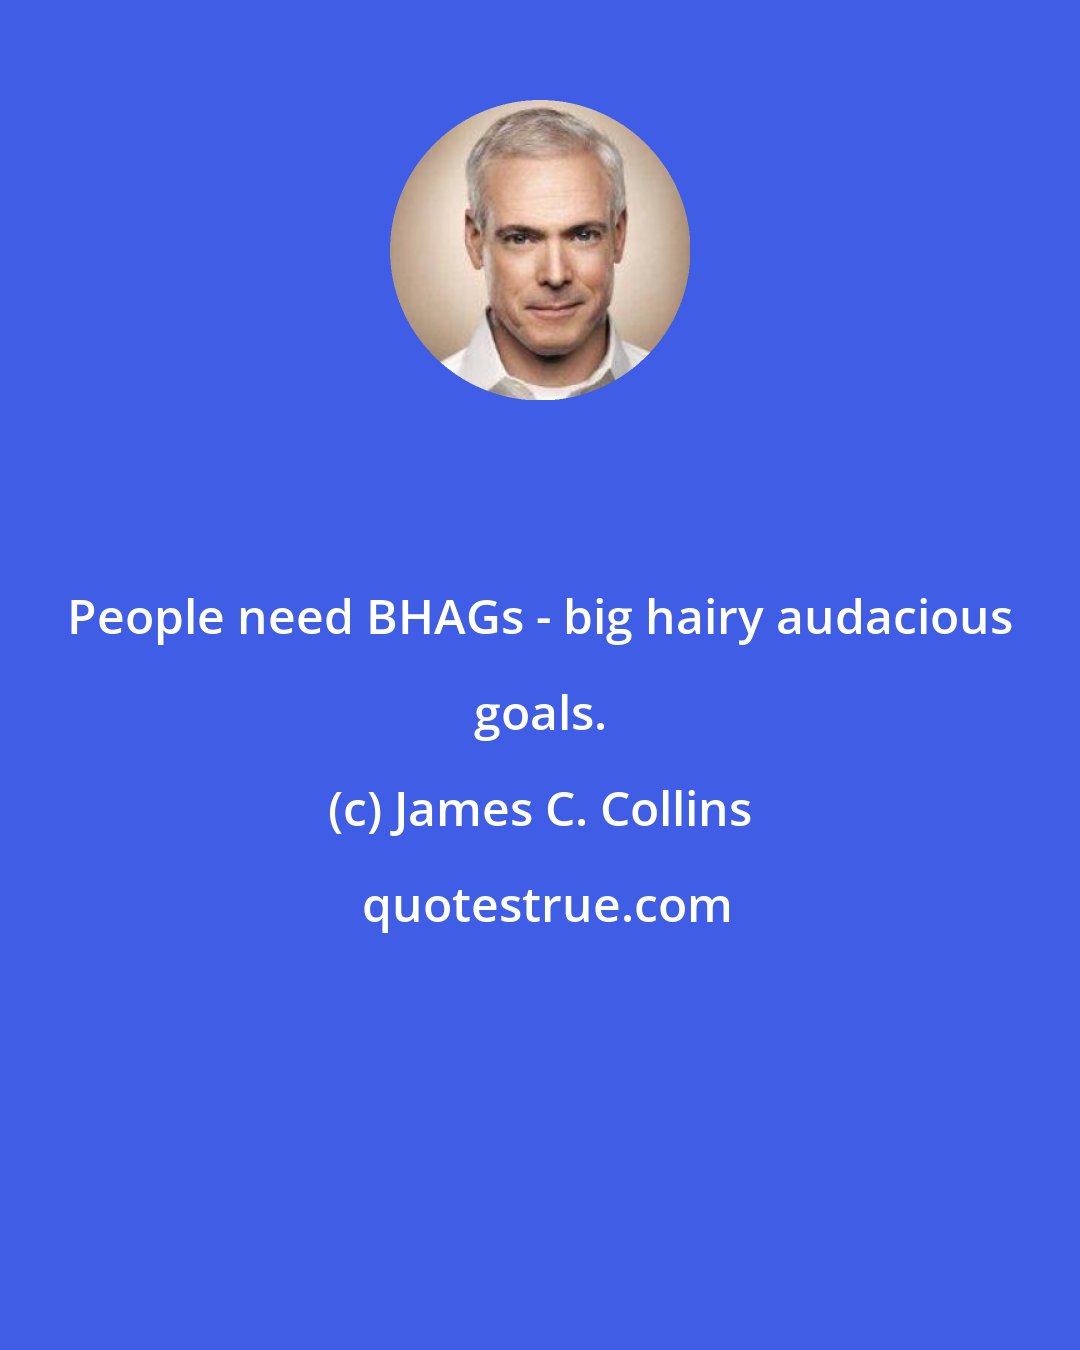 James C. Collins: People need BHAGs - big hairy audacious goals.